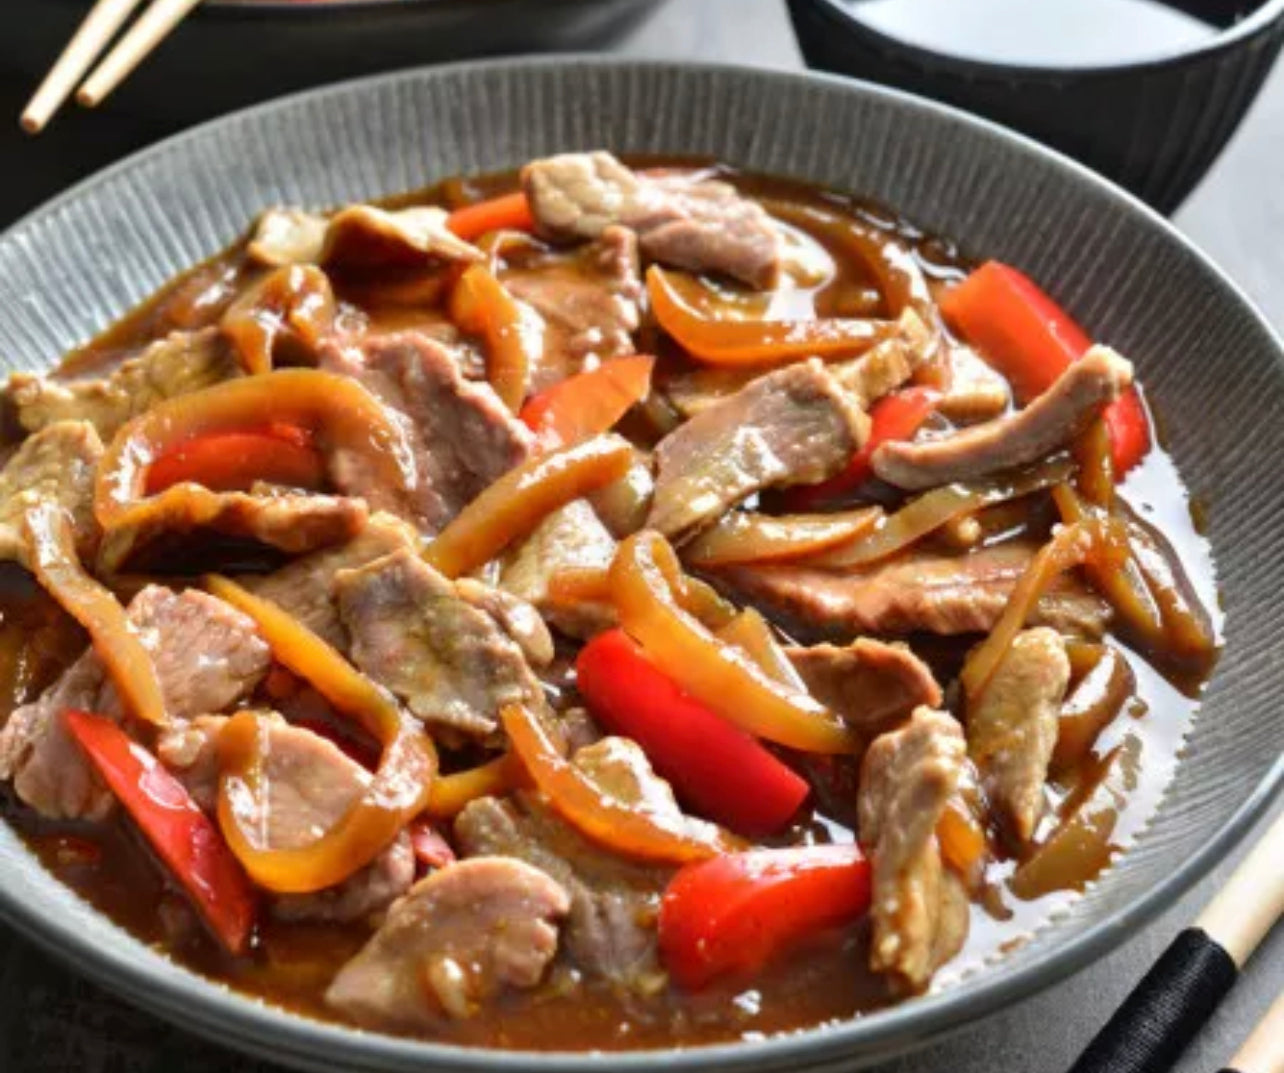 Spicy beef with onions - 1.8kg